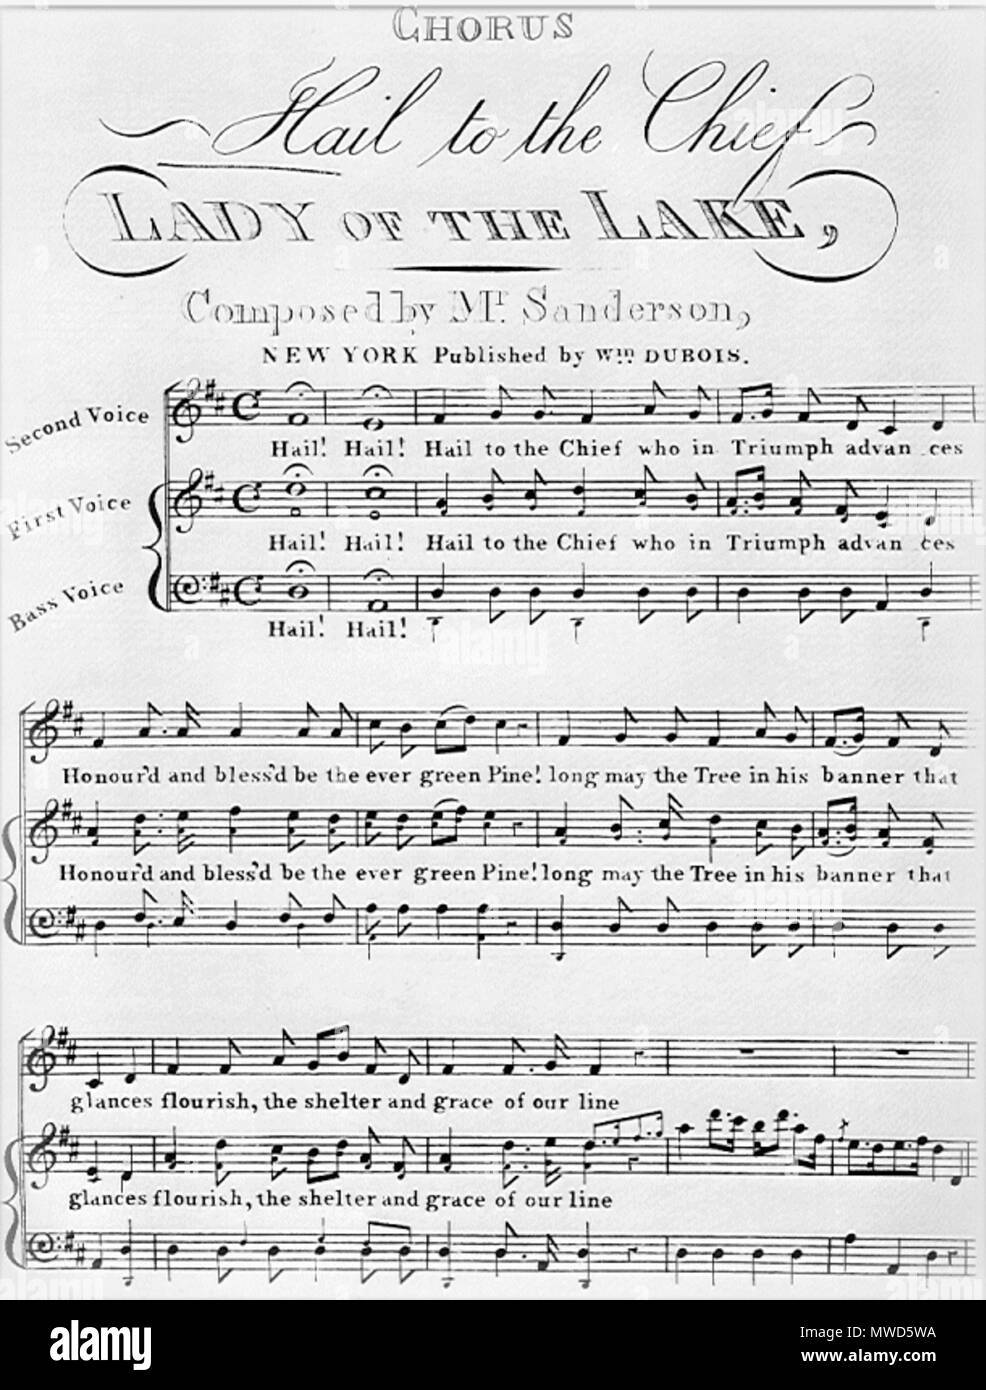 . The author is a Mr Sanderson. This is a picture of the chorus of Hail to the Chief sheet music. The website where I found this image is http://www.jmu.edu/madison/center/main pages/material/audio/music/hail.htm. Uploaded to Wikipedia 2006-07-24. This file is lacking author information. 263 Hail to the Chief Chorus Sheet Music Stock Photo